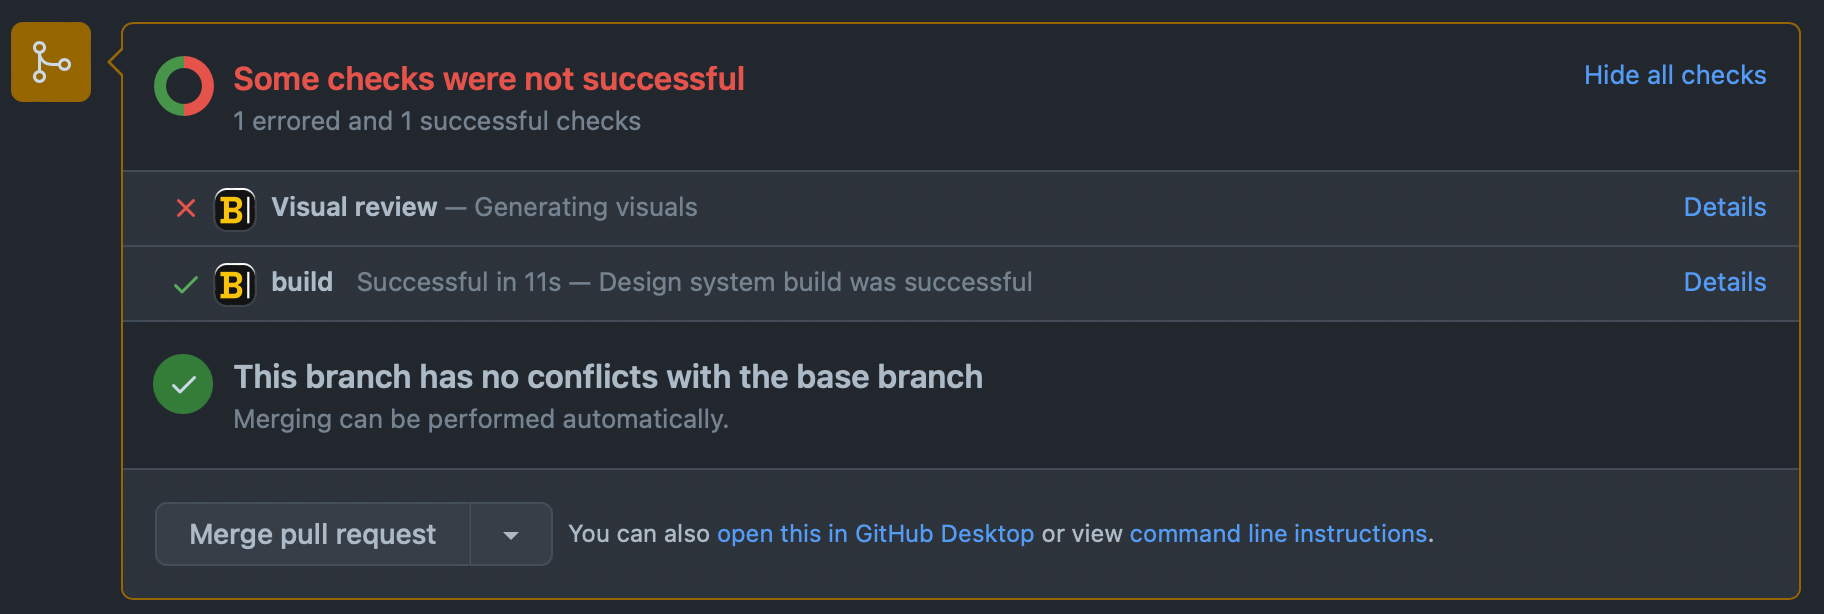 Github build window showing steps of build succeed and visual check failed